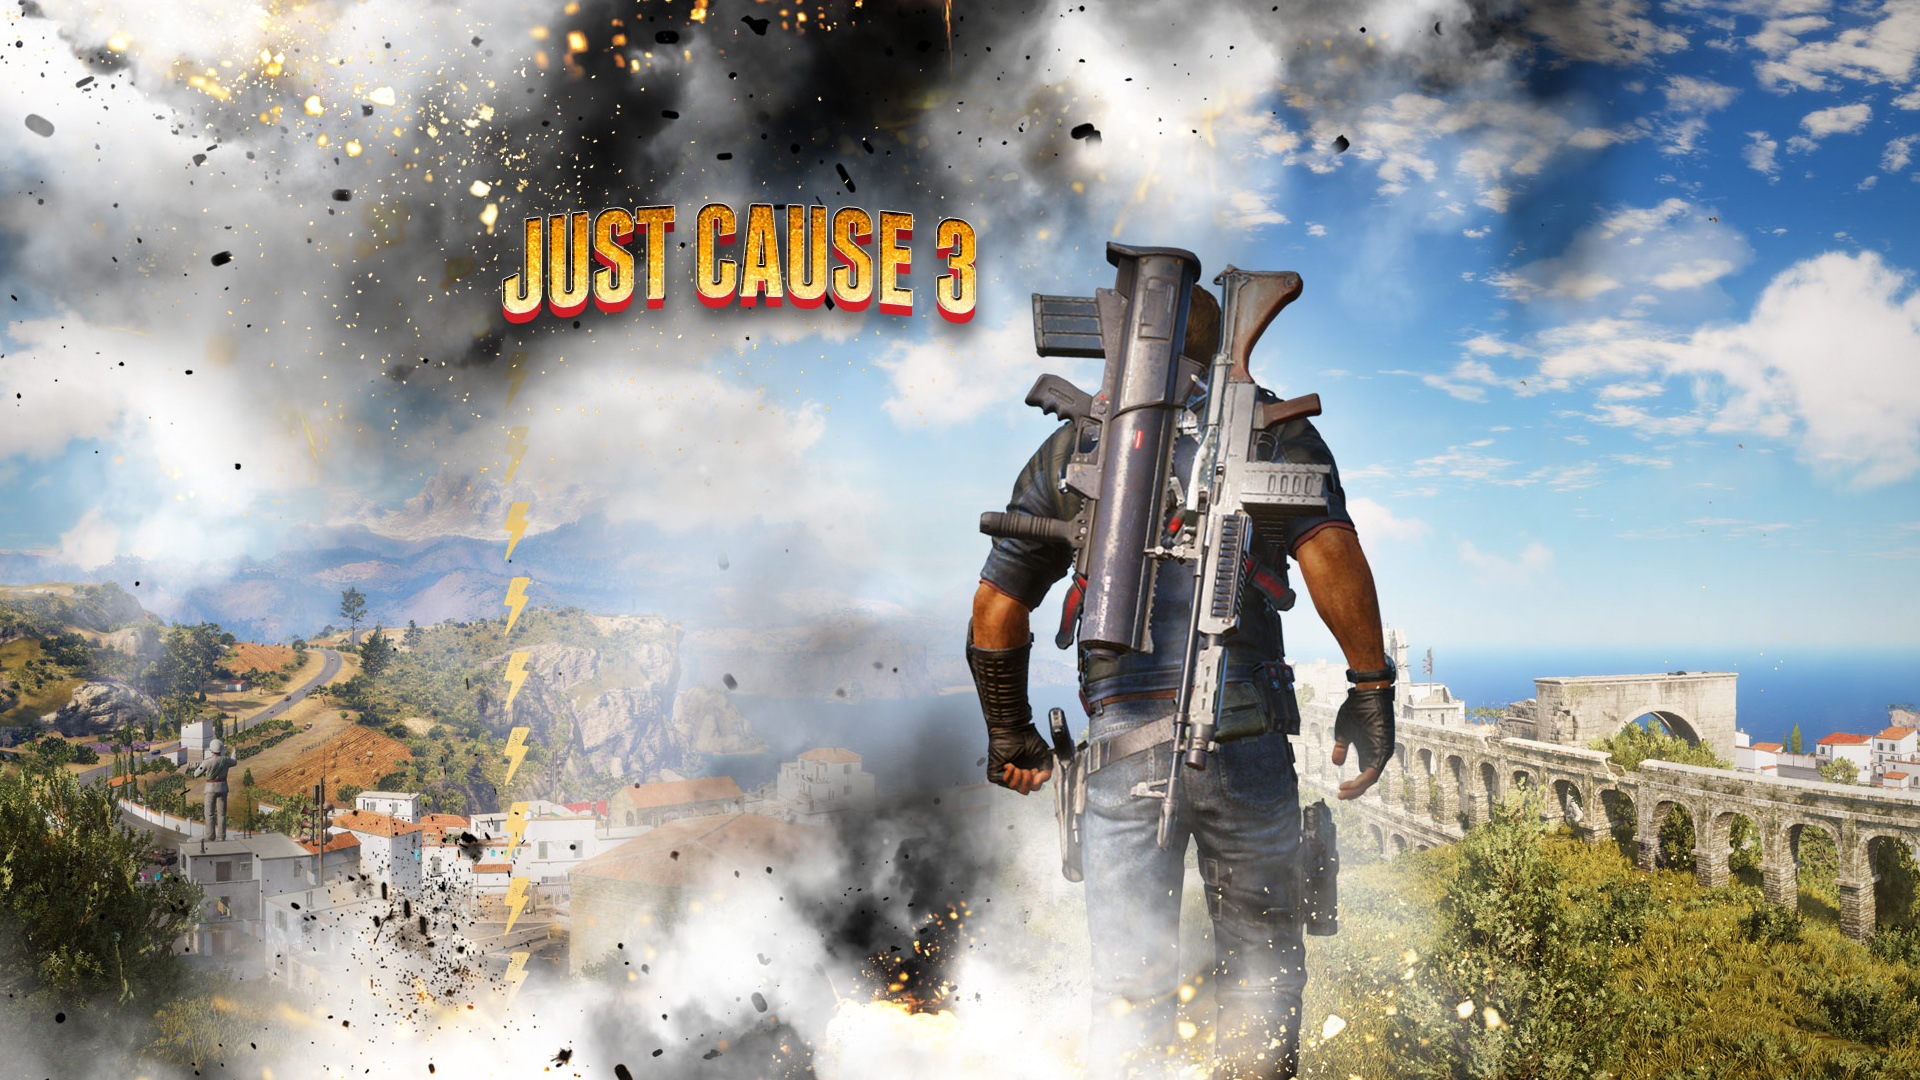 Just Cause 3 HD game wallpapers #2 - 1920x1080